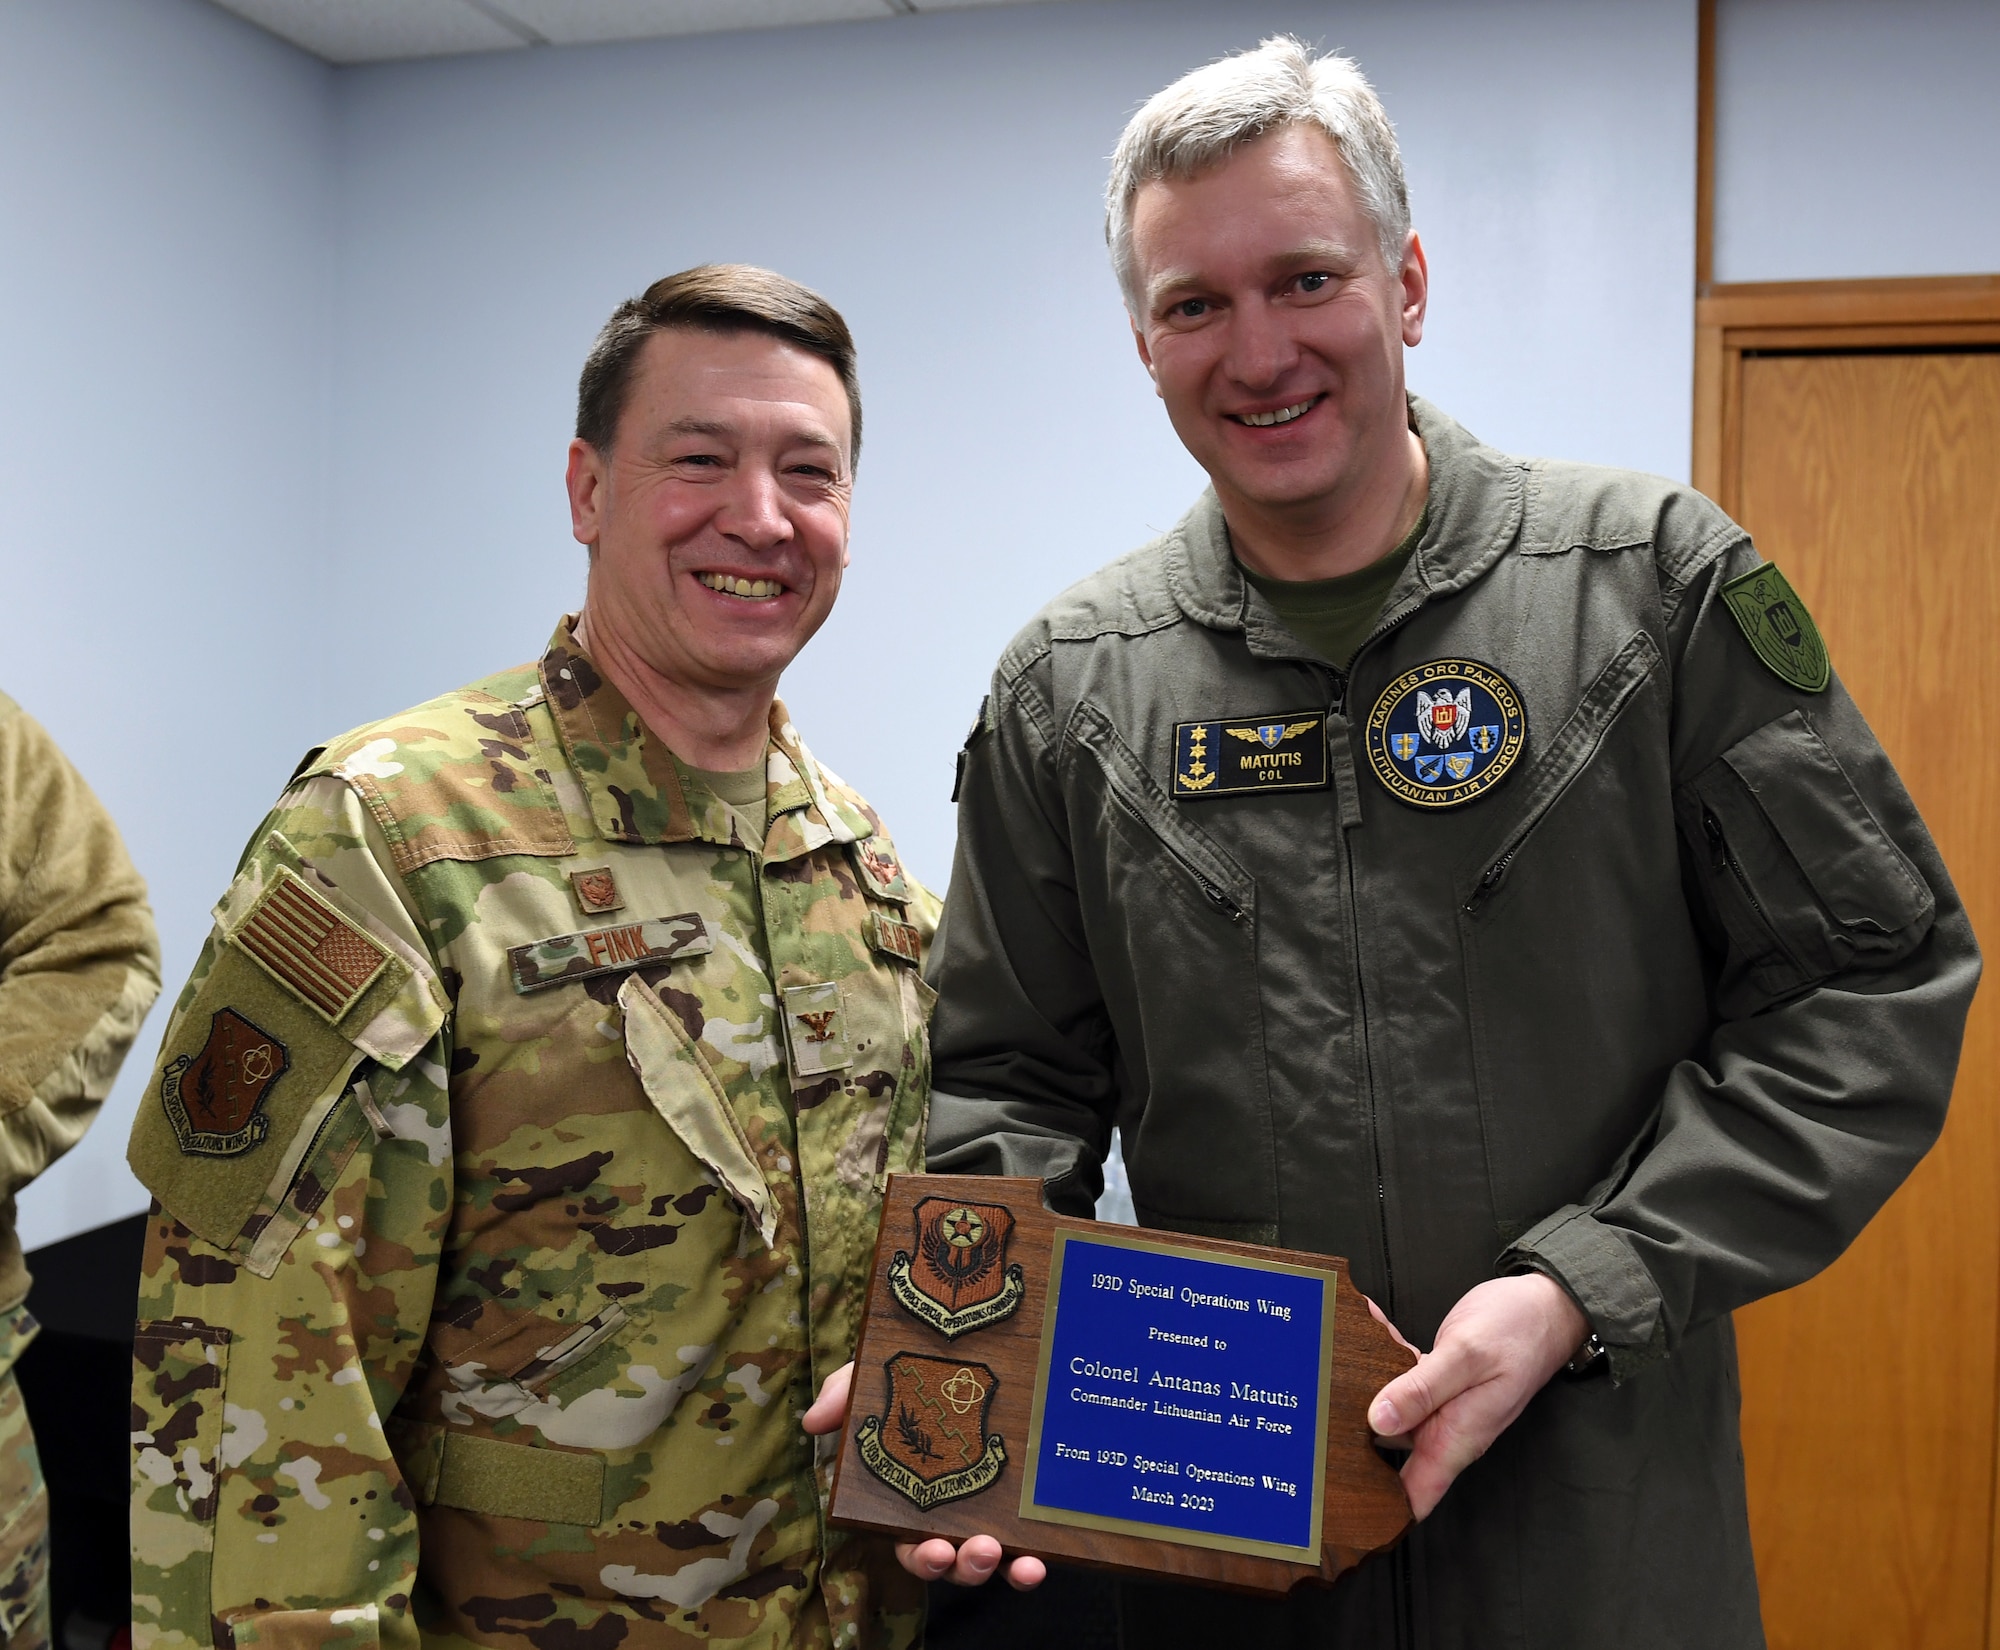 Col. Antanas Matutis, Lithuanian Air Force commander, visited with Airmen from the 193rd Special Operations Wing, March 21, 2023, in Middletown, Pennsylvania.